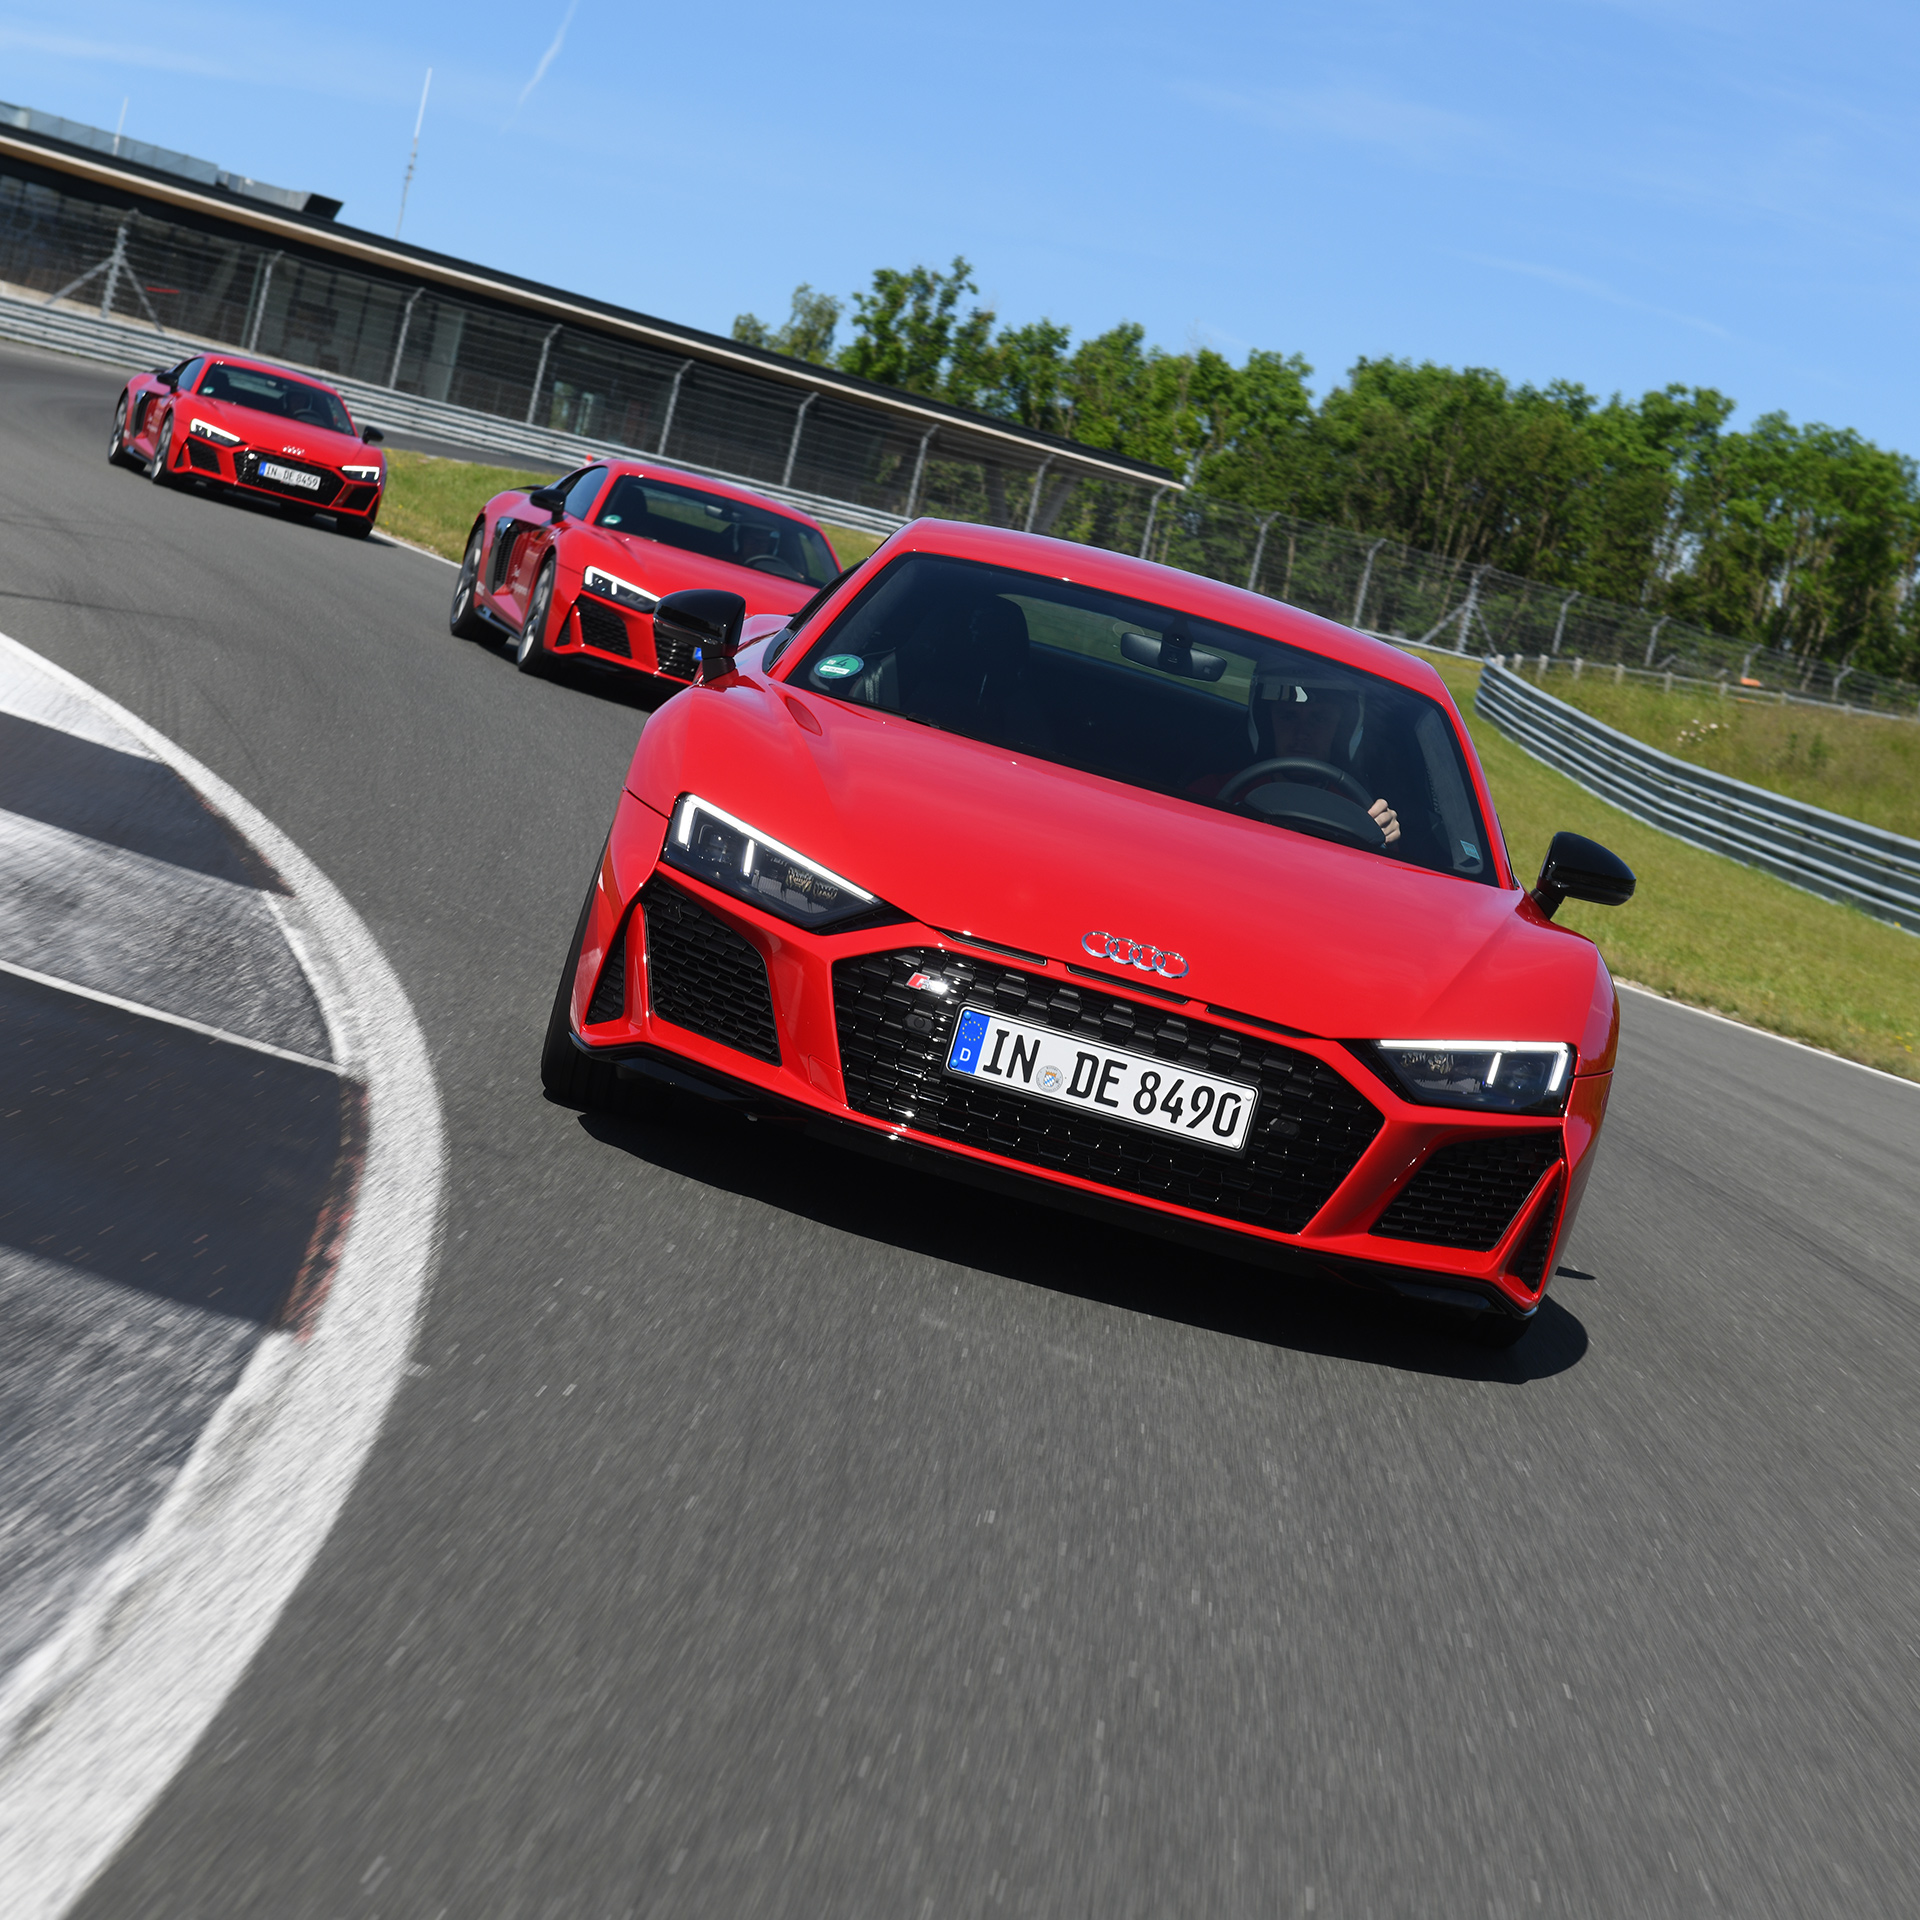 Three red Audi R8 models drive one after another on a race track